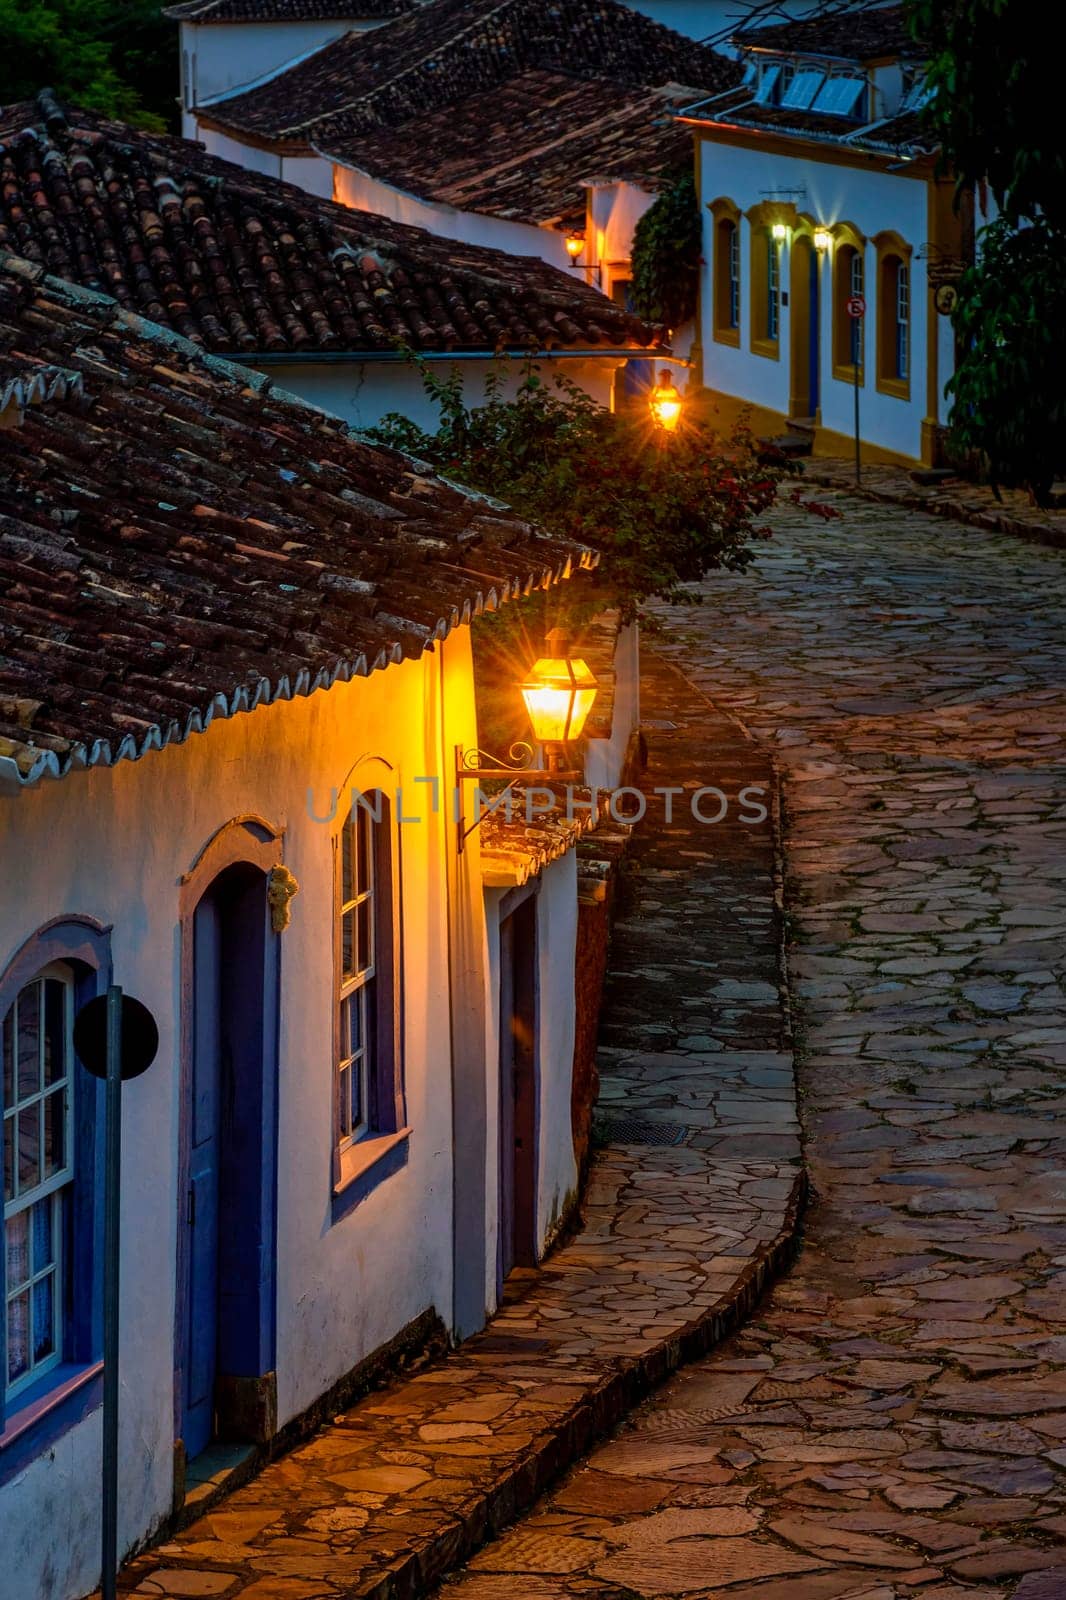 Night image of a slope with cobblestones and colonial-style houses in the old town of Tiradentes in Minas Gerais